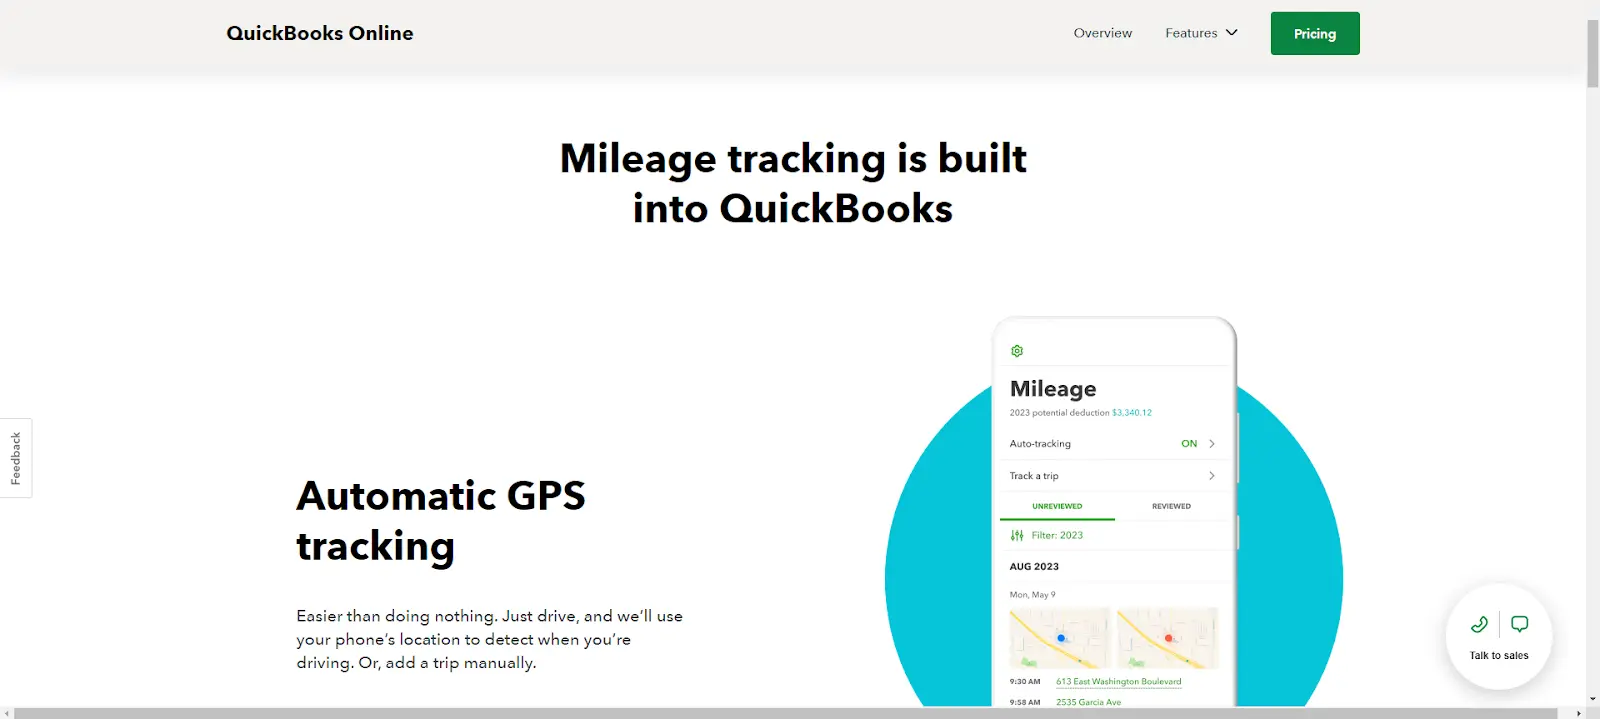 The QuickBooks mobile app is designed for automatic mileage tracking.